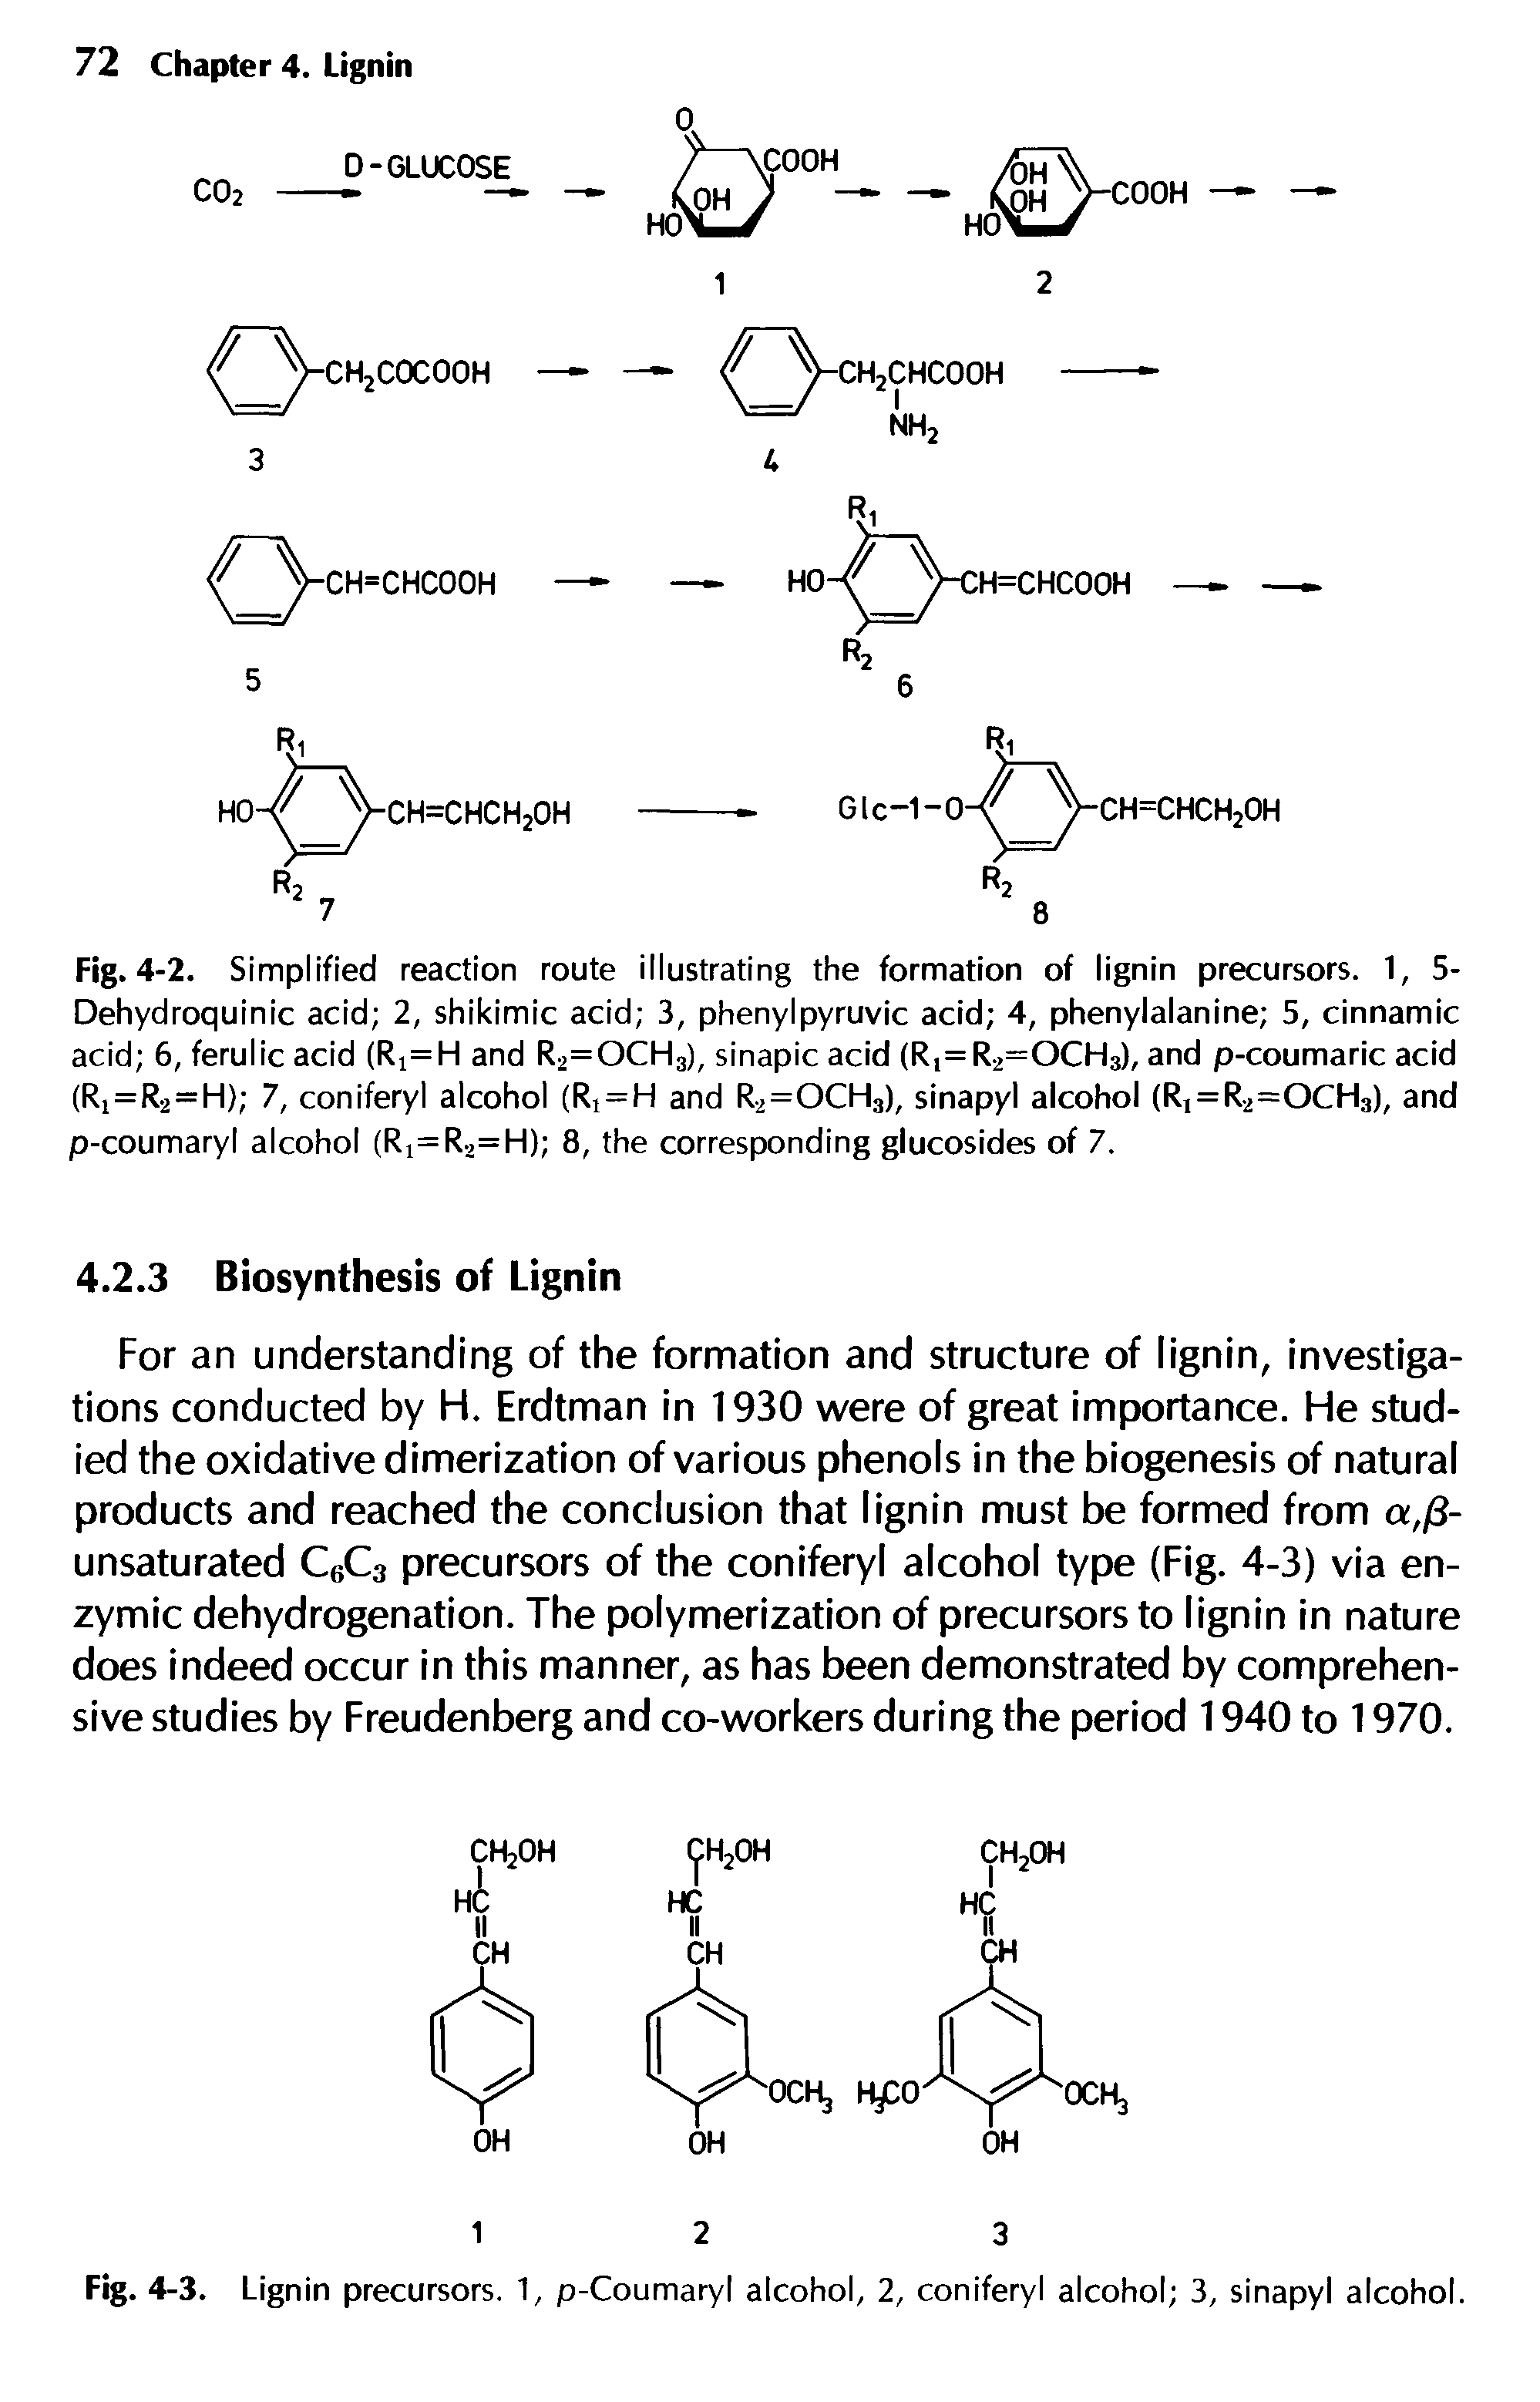 Fig. 4-2. Simplified reaction route illustrating the formation of lignin precursors. 1, 5-Dehydroquinic acid 2, shikimic acid 3, phenylpyruvic acid 4, phenylalanine 5, cinnamic acid 6, ferulic acid (Ri=H and R2=OCH3), sinapic acid (R,= R2=OCH3), and p-coumaric acid (R1=R2 = H) 7, coniferyl alcohol (Ri = H and R2=OCH3), sinapyl alcohol (Rj = R2=OCH3), and p-coumaryl alcohol (R =R2=H) 8, the corresponding glucosides of 7.